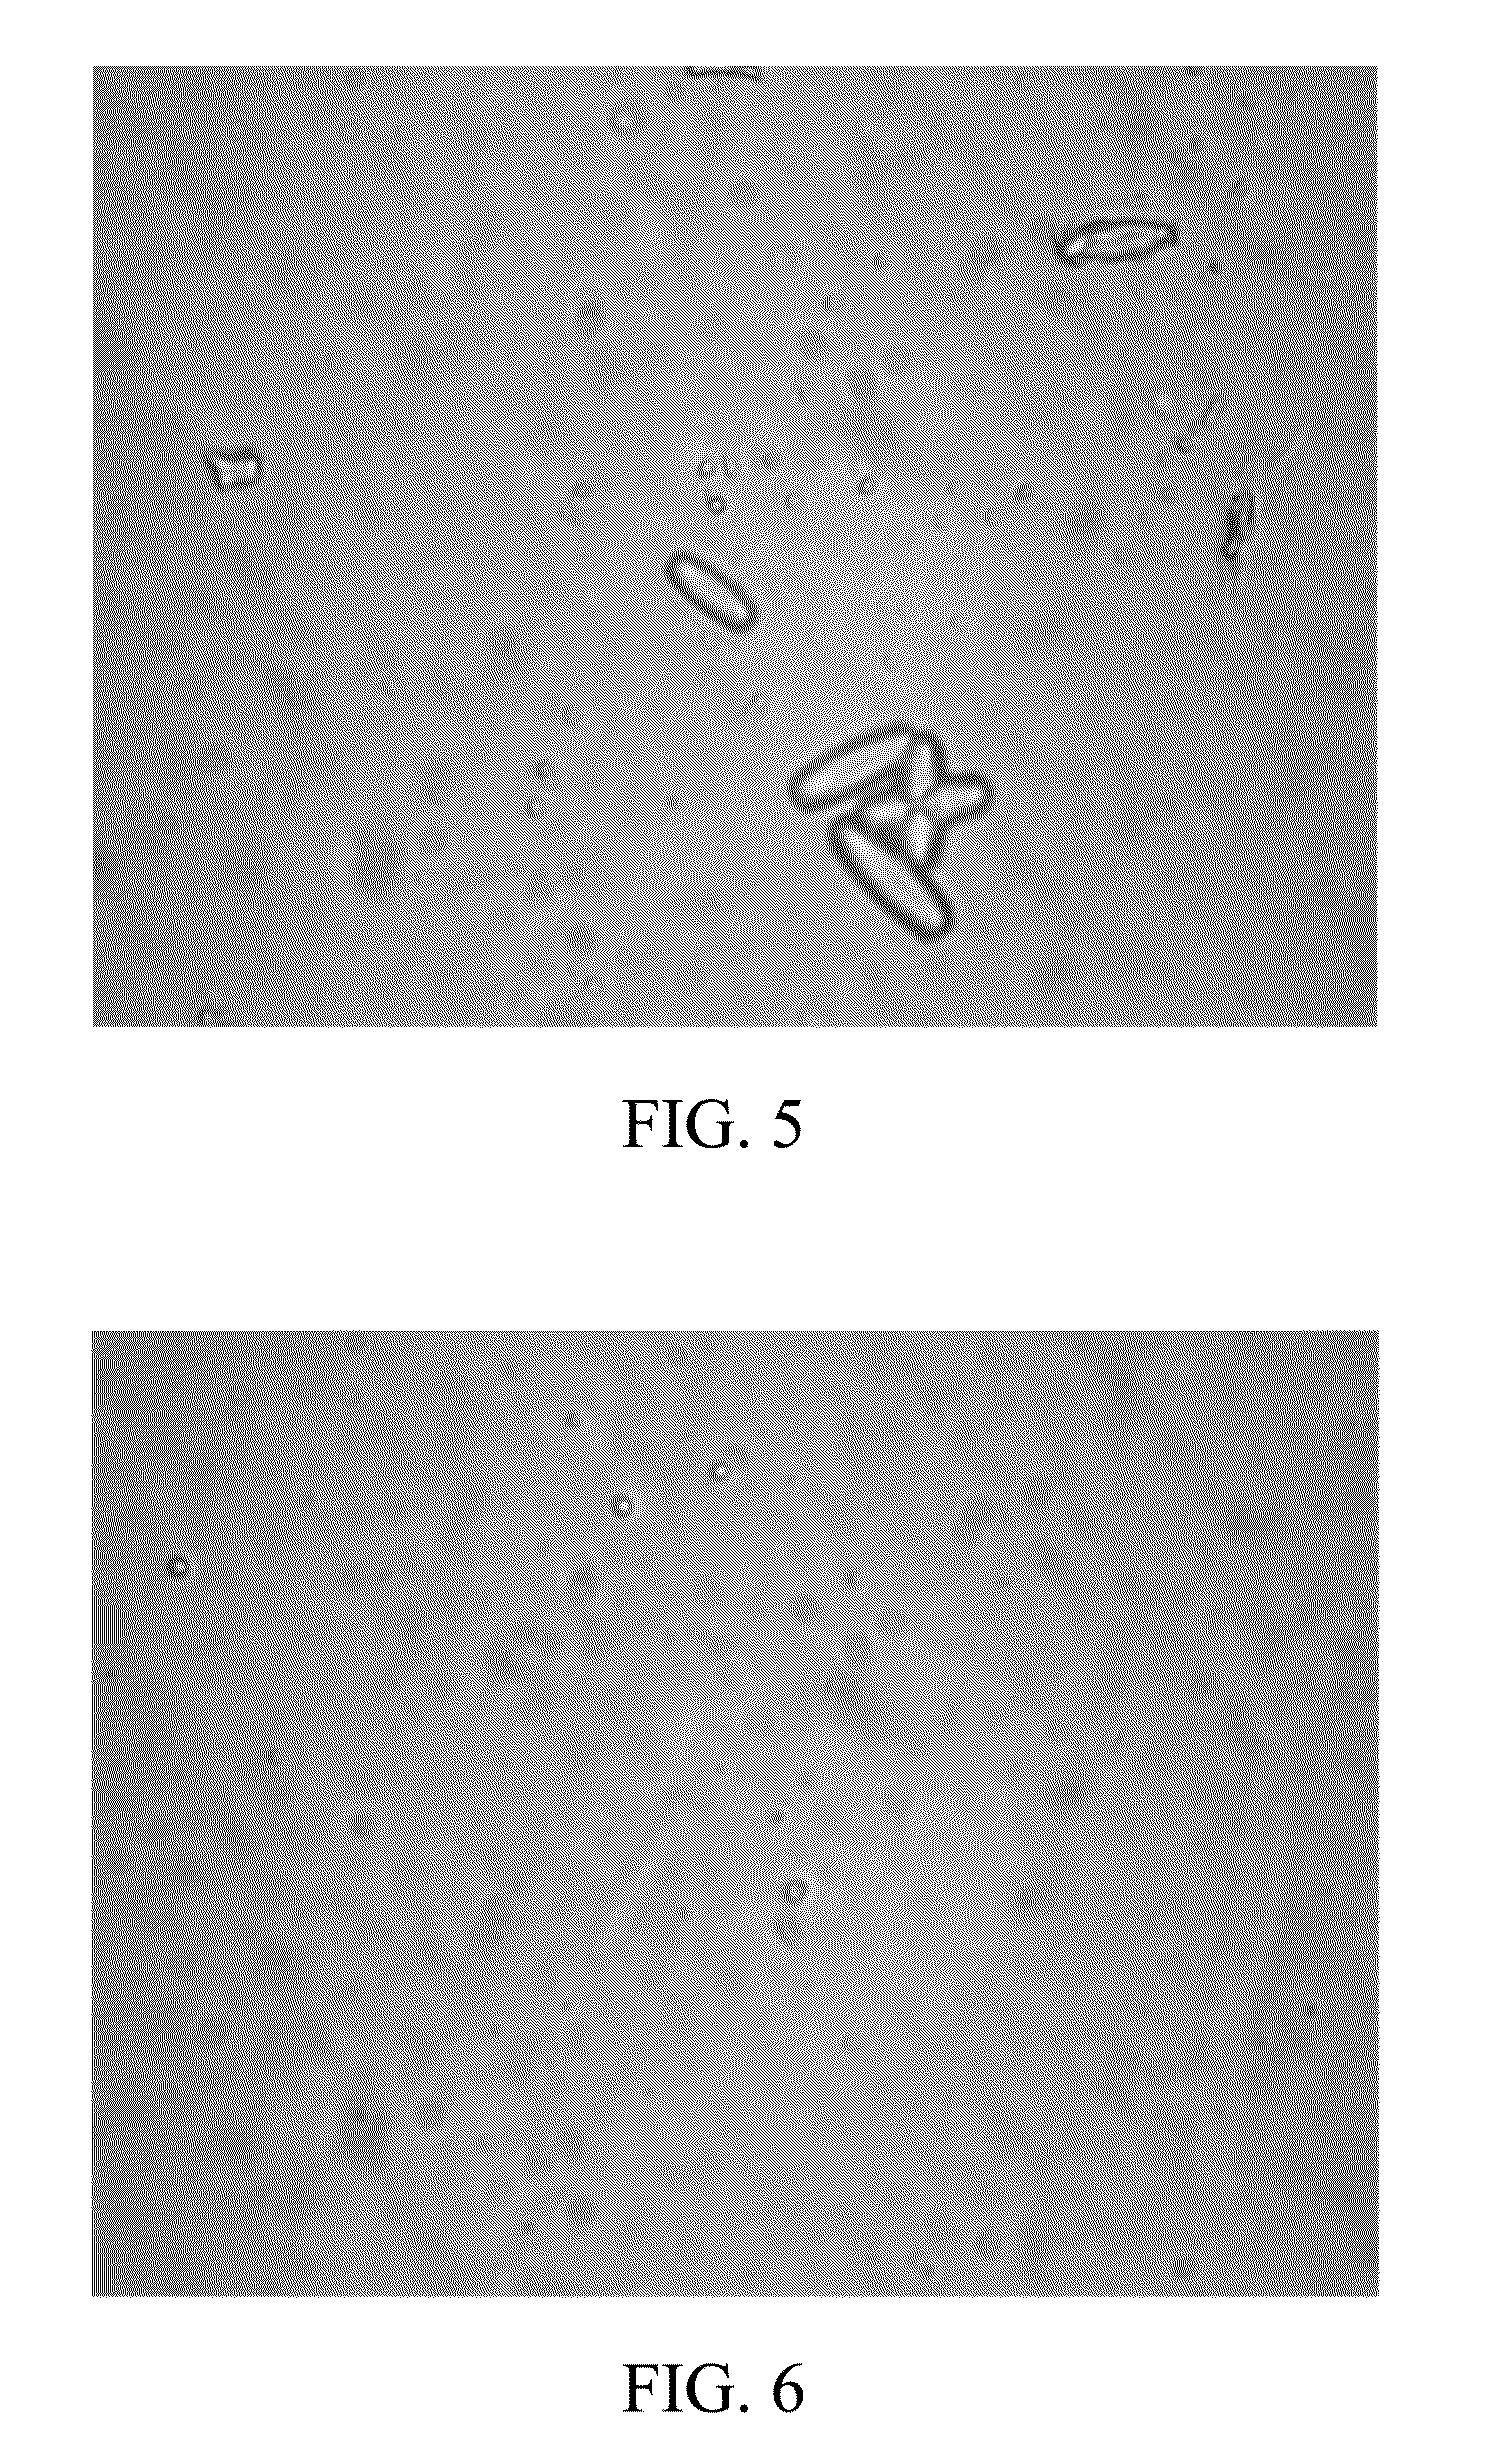 Liquid compositions of insoluble drugs and preparation methods thereof